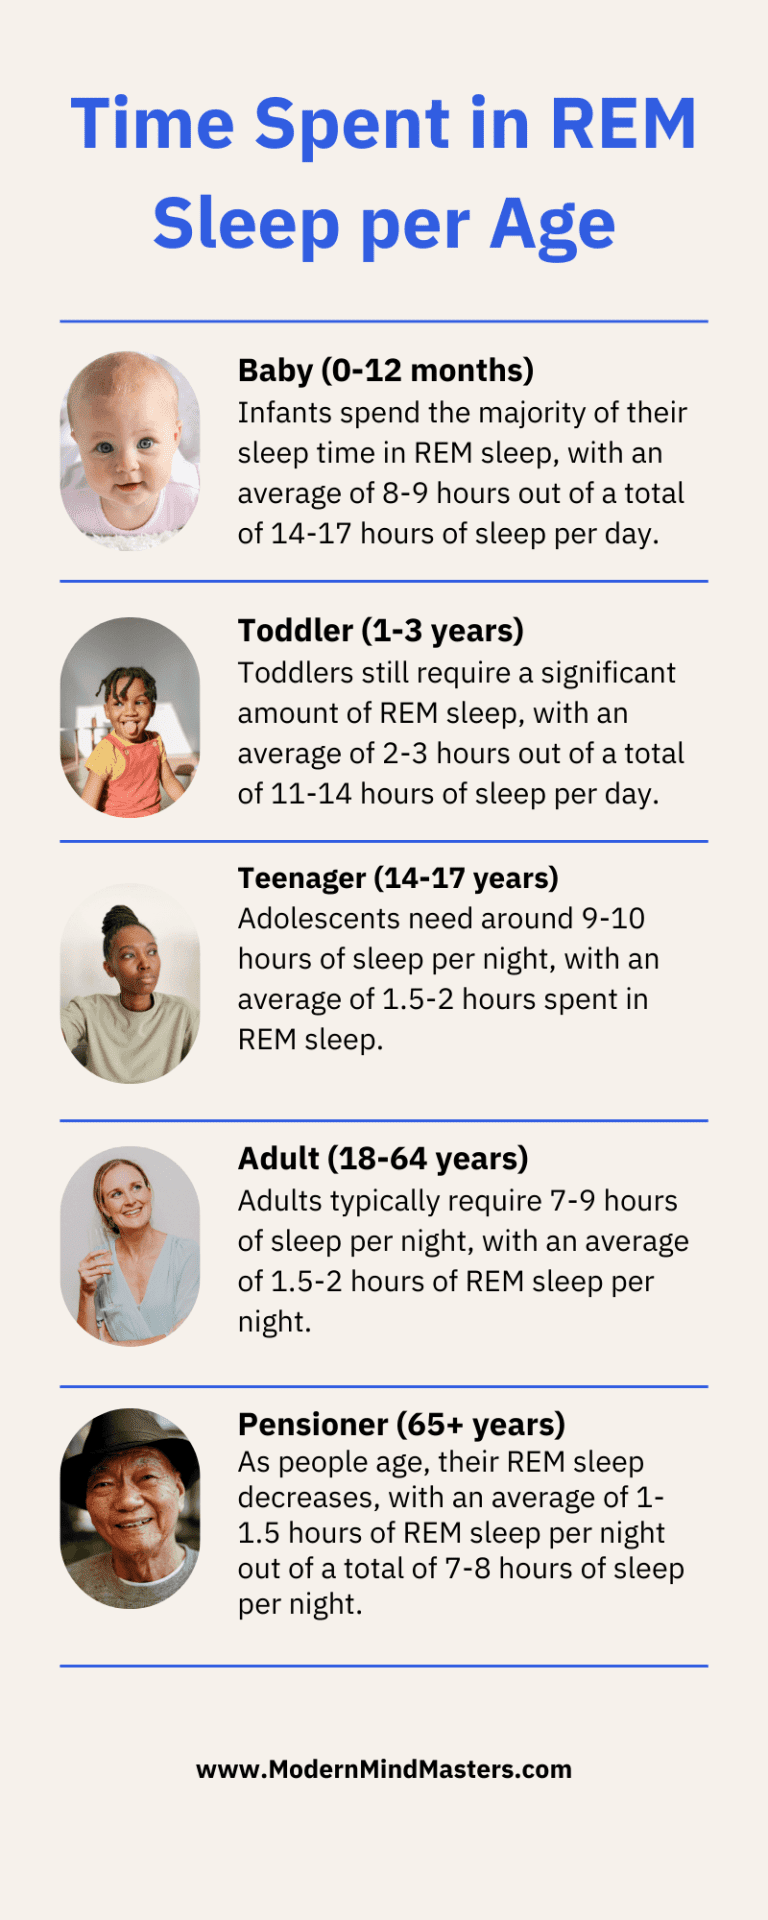 Amount of REM sleep for each age group